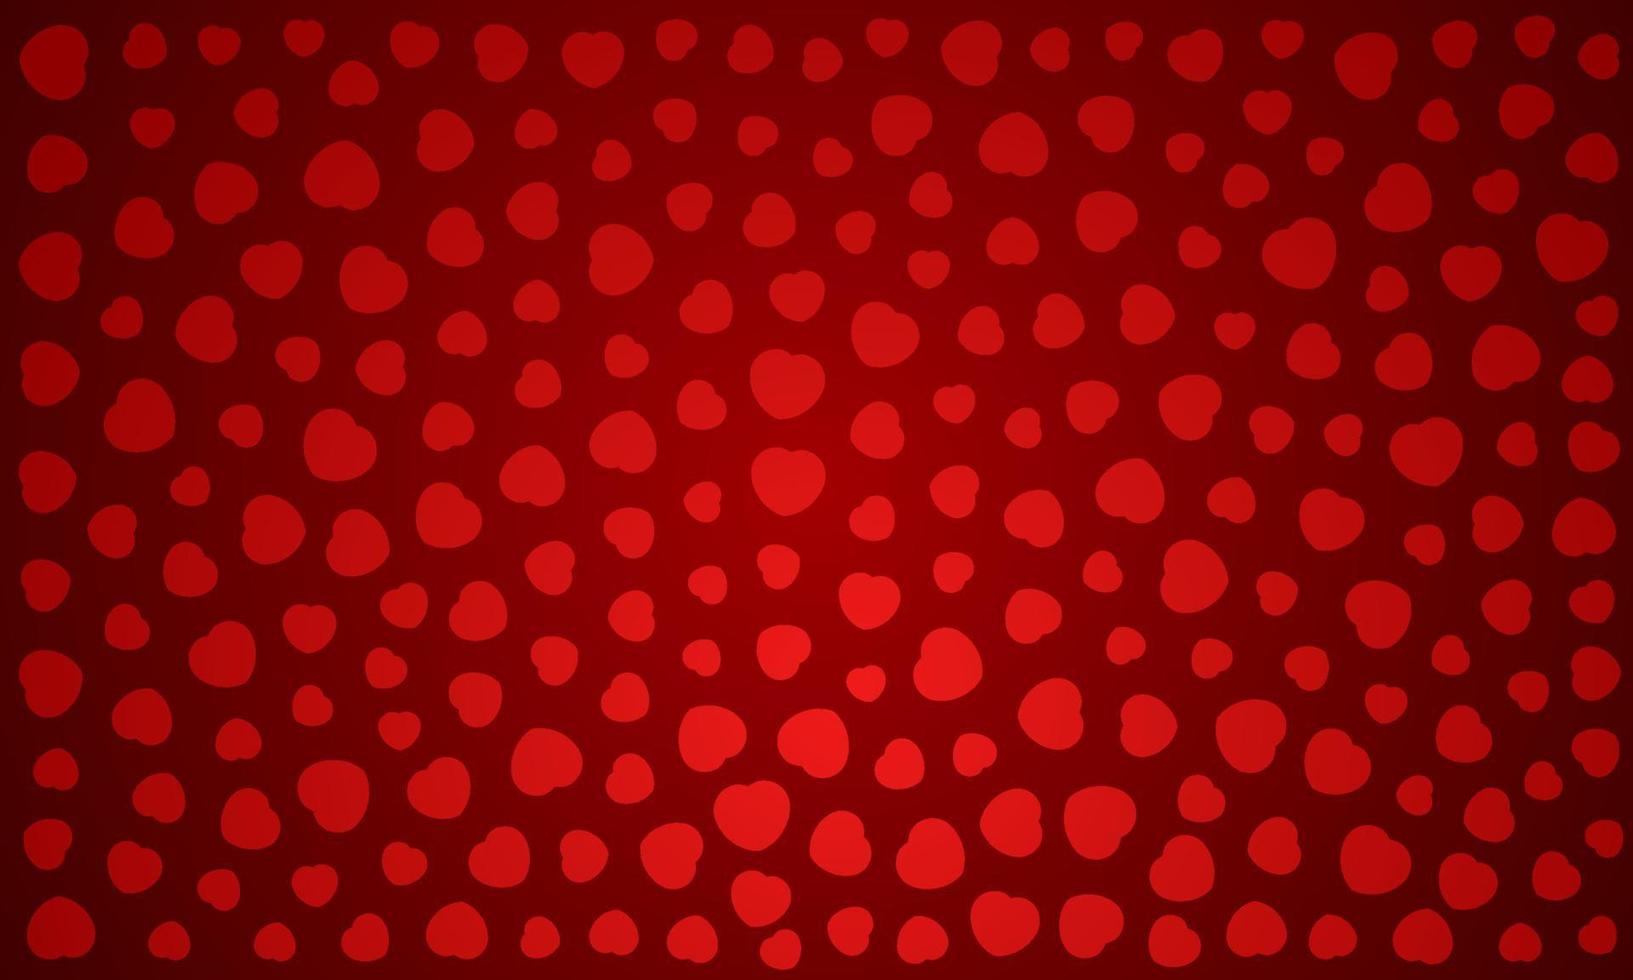 Happy Valentines Day Background. Background with hearts for Valentines Day. Vector illustration.